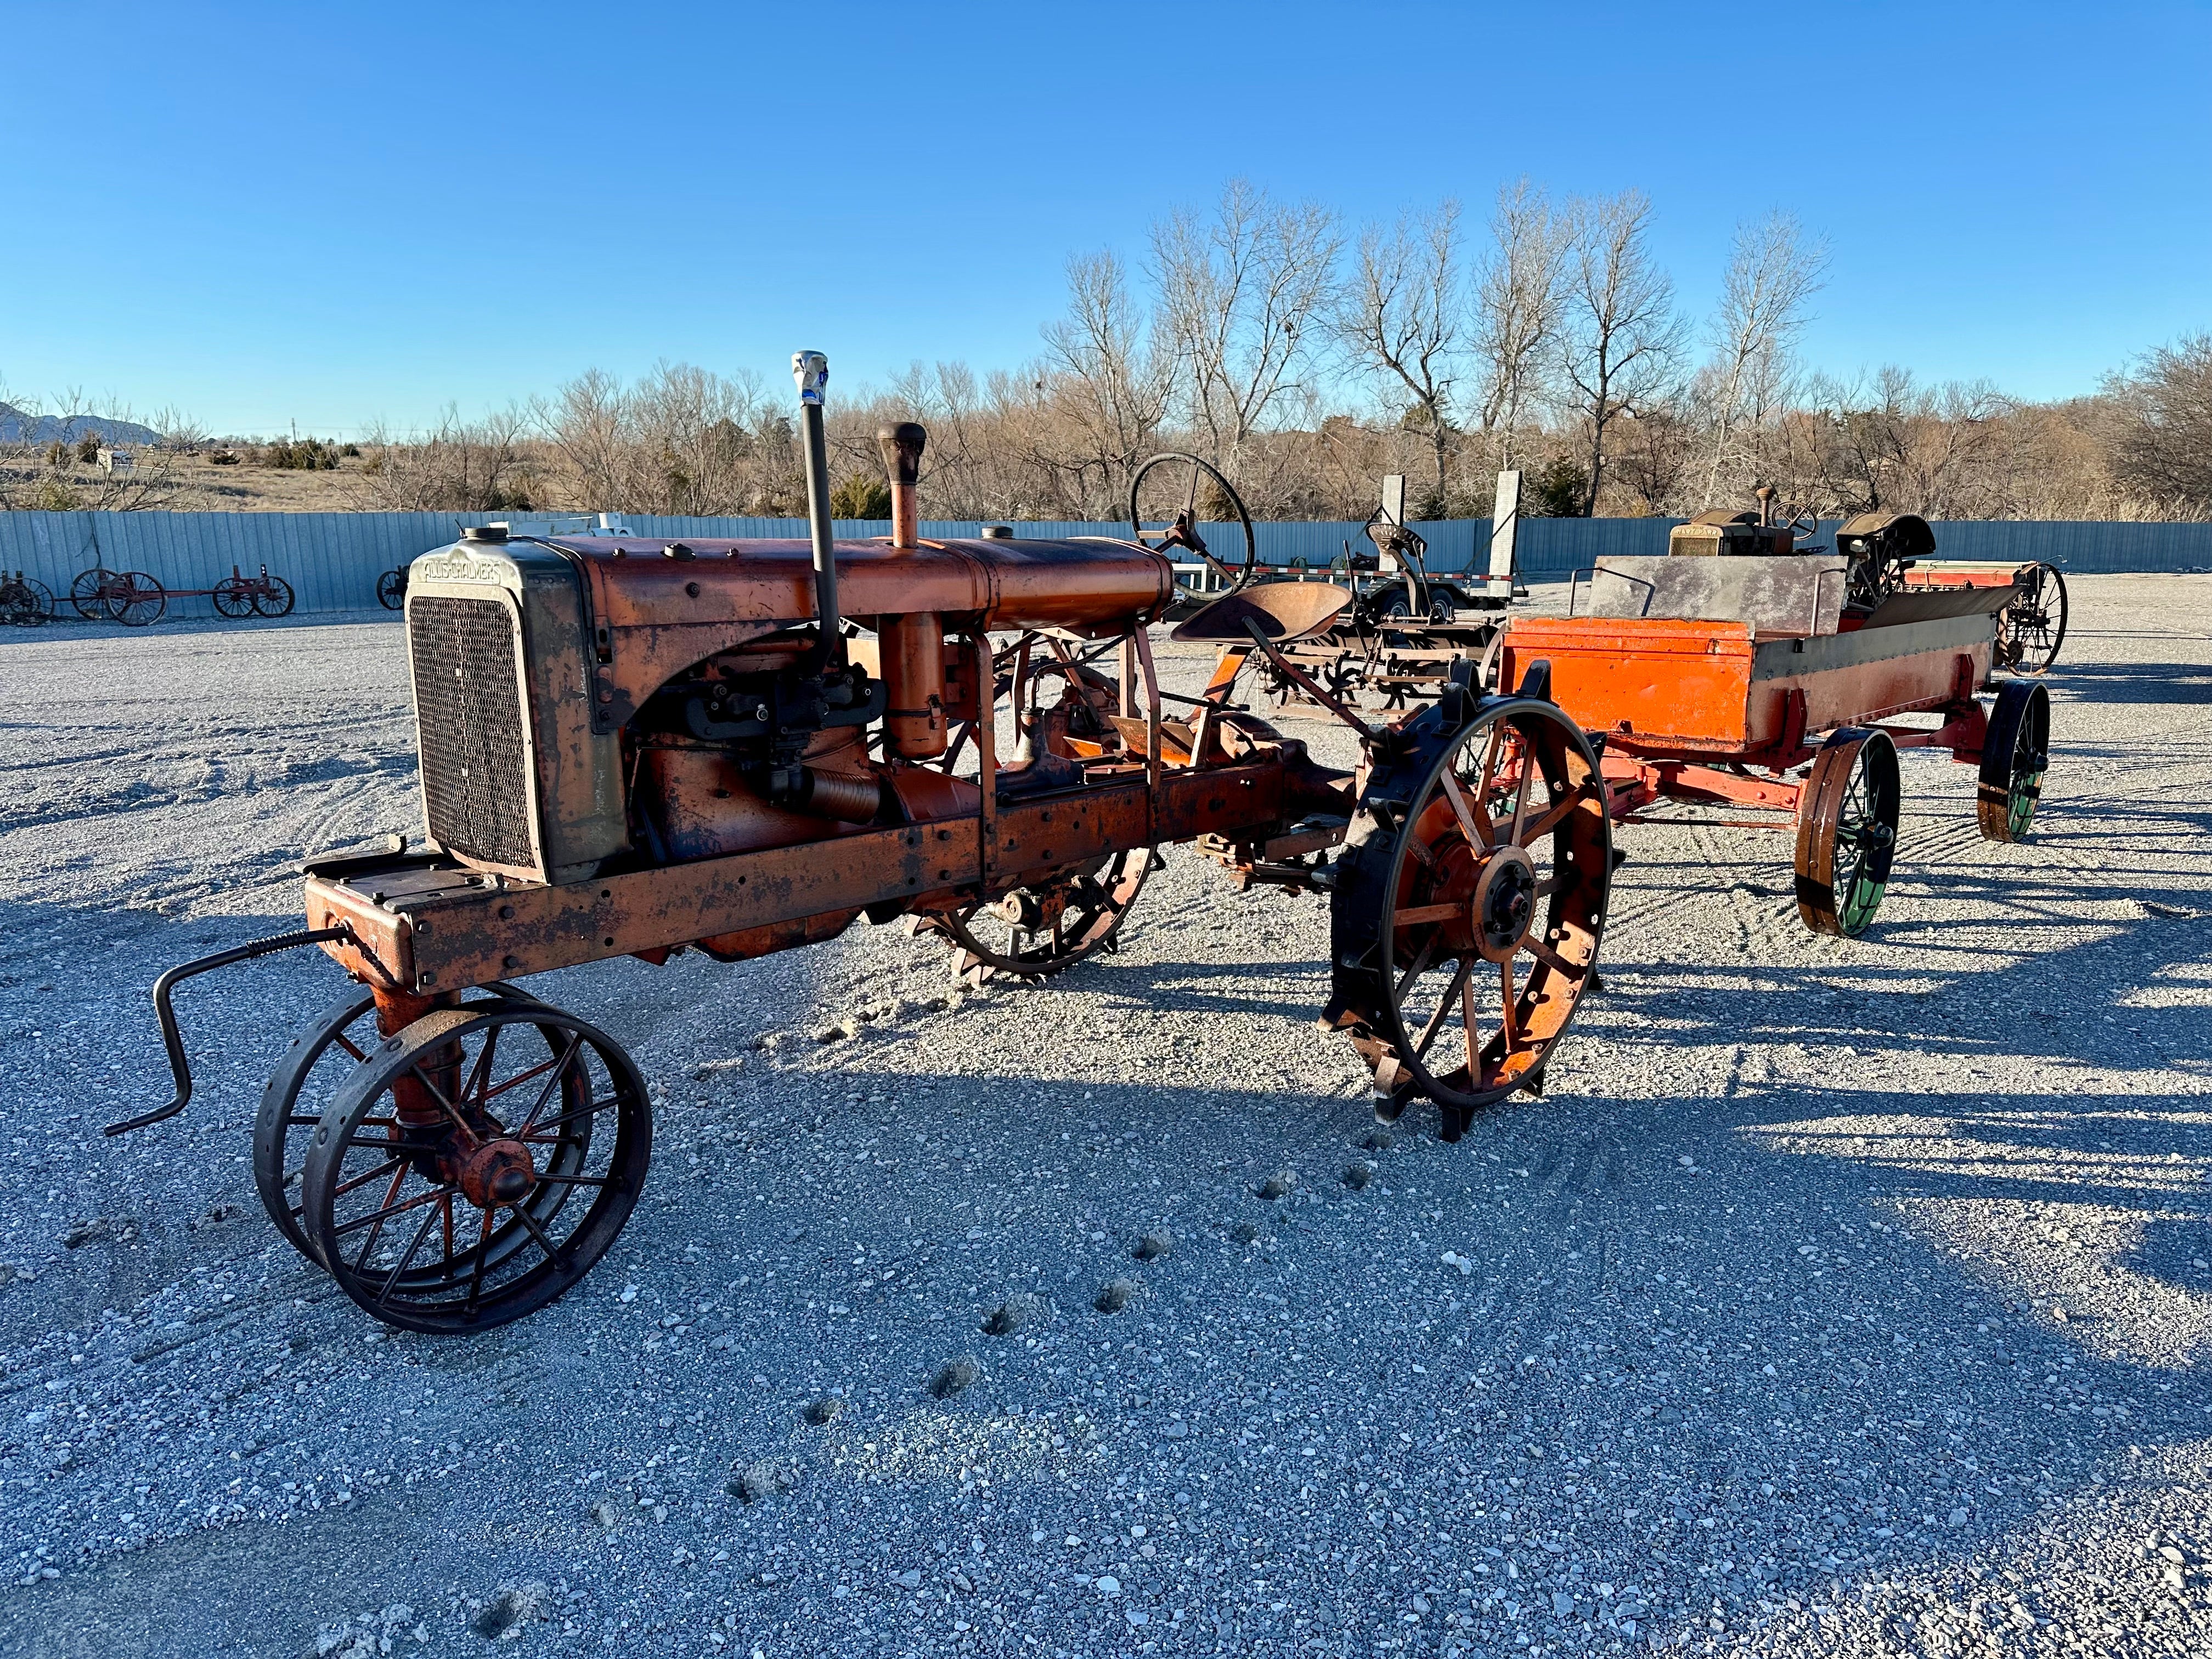 SOLD*Allis Chalmers Tractor with Harvest Wagon